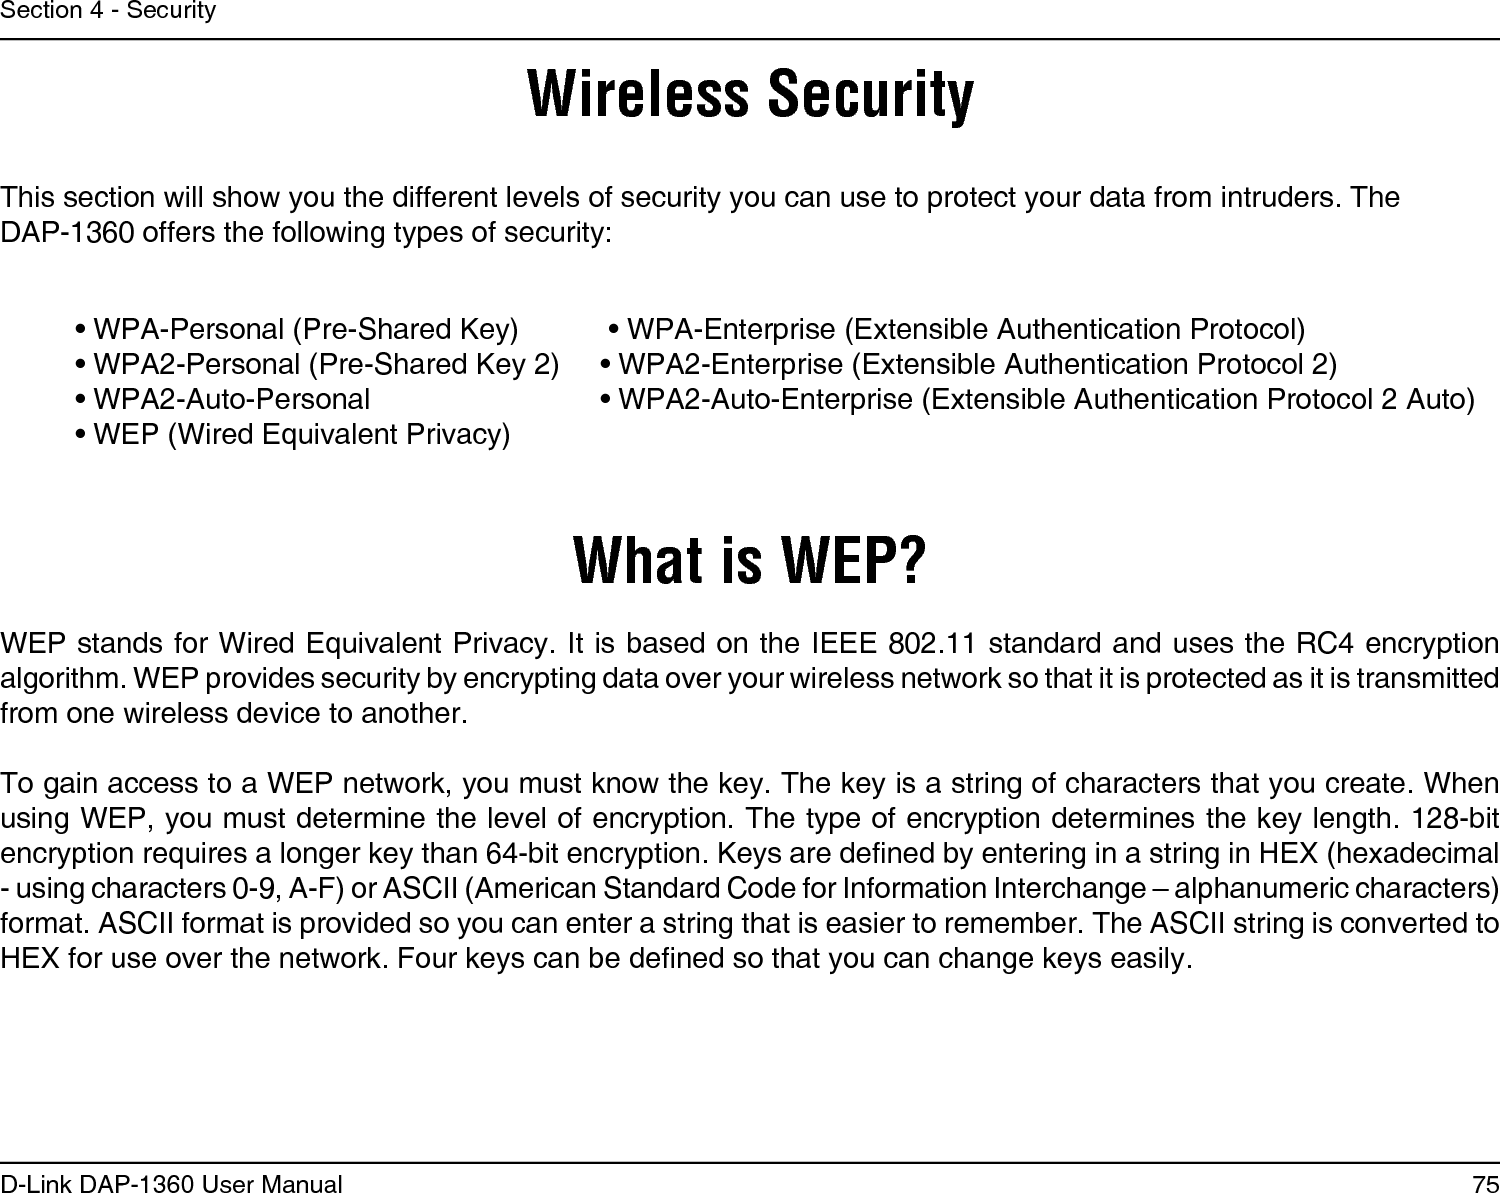 75D-Link DAP-1360 User ManualSection 4 - SecurityWireless SecurityThis section will show you the different levels of security you can use to protect your data from intruders. The DAP-1360 offers the following types of security:  • WPA-Personal (Pre-Shared Key)           • WPA-Enterprise (Extensible Authentication Protocol)  • WPA2-Personal (Pre-Shared Key 2)  • WPA2-Enterprise (Extensible Authentication Protocol 2)  • WPA2-Auto-Personal       • WPA2-Auto-Enterprise (Extensible Authentication Protocol 2 Auto)  • WEP (Wired Equivalent Privacy)What is WEP?WEP stands for Wired Equivalent Privacy. It is based on the IEEE 802.11 standard and uses the RC4 encryption algorithm. WEP provides security by encrypting data over your wireless network so that it is protected as it is transmitted from one wireless device to another.To gain access to a WEP network, you must know the key. The key is a string of characters that you create. When using WEP, you must determine the level of encryption. The type of encryption determines the key length. 128-bit encryption requires a longer key than 64-bit encryption. Keys are dened by entering in a string in HEX (hexadecimal - using characters 0-9, A-F) or ASCII (American Standard Code for Information Interchange – alphanumeric characters) format. ASCII format is provided so you can enter a string that is easier to remember. The ASCII string is converted to HEX for use over the network. Four keys can be dened so that you can change keys easily.